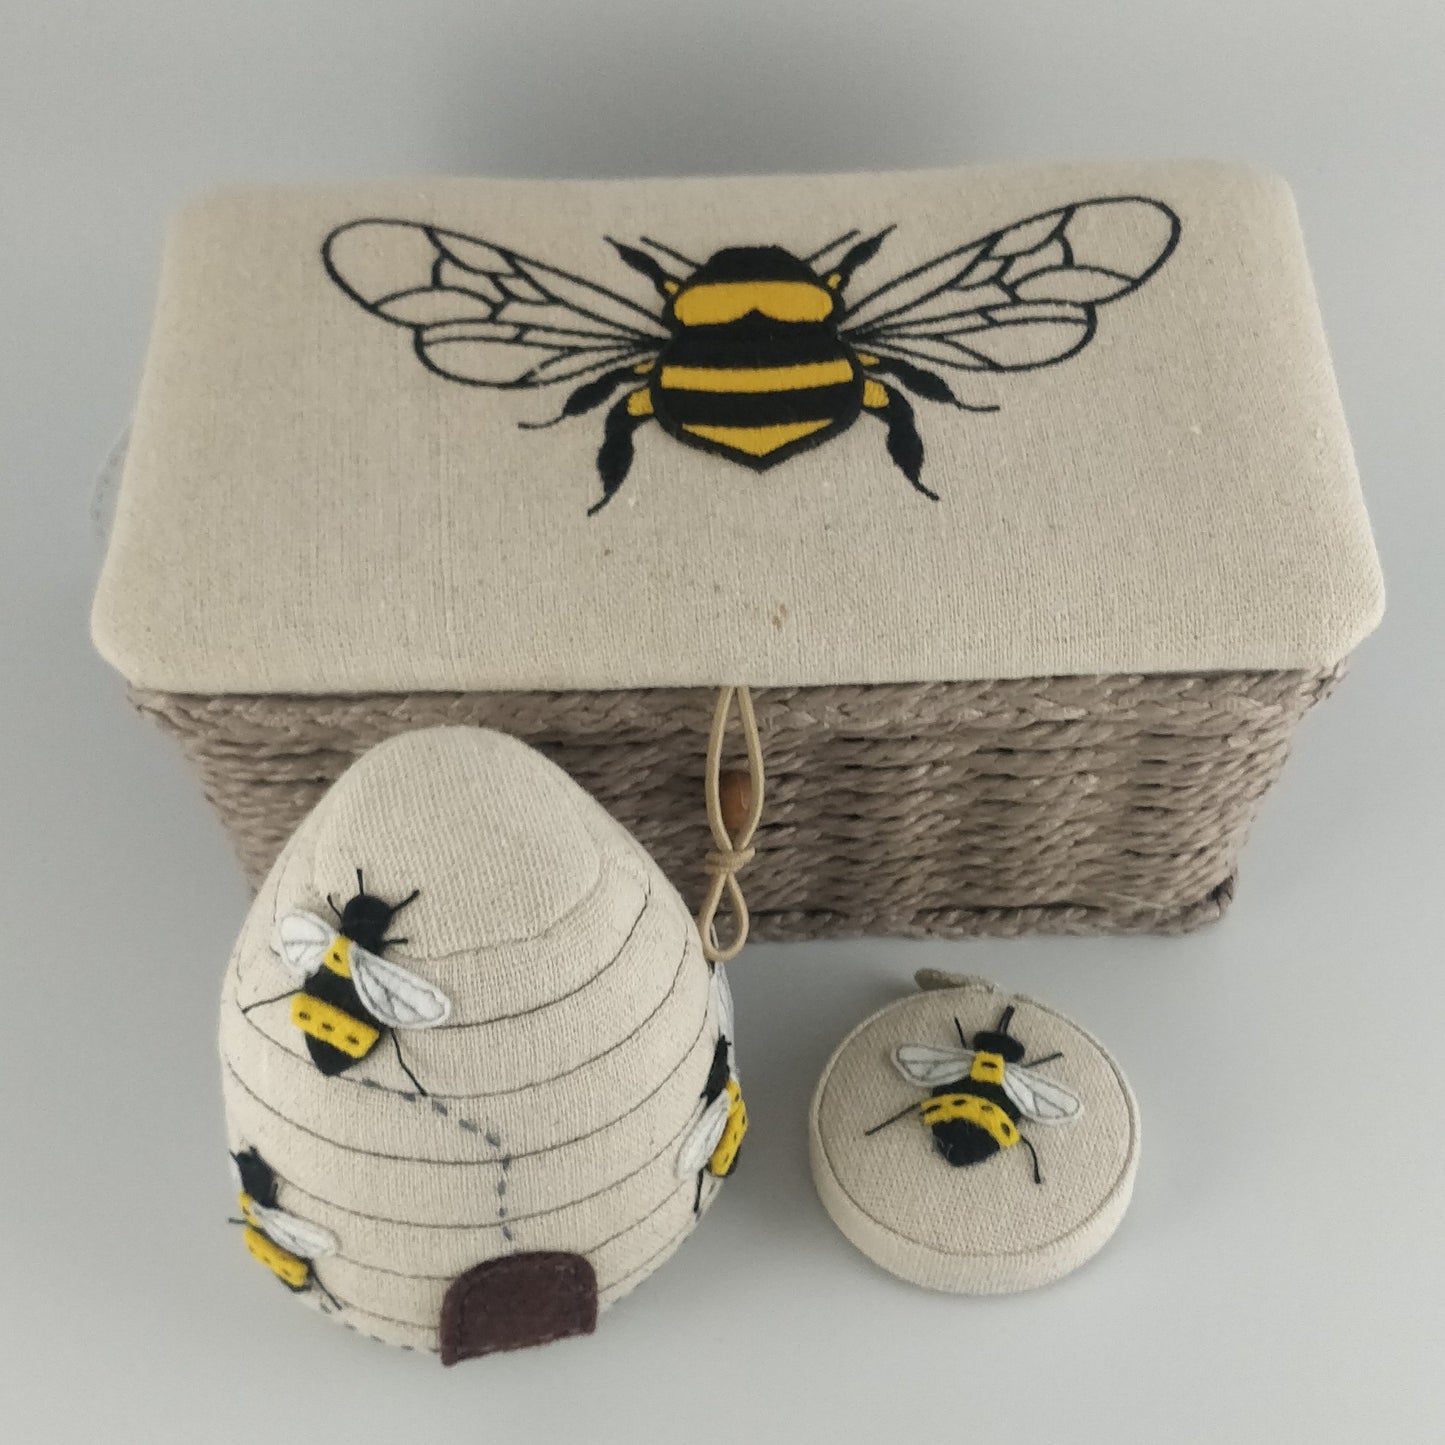 SEWING BOX GIFT SET - LINEN BEE